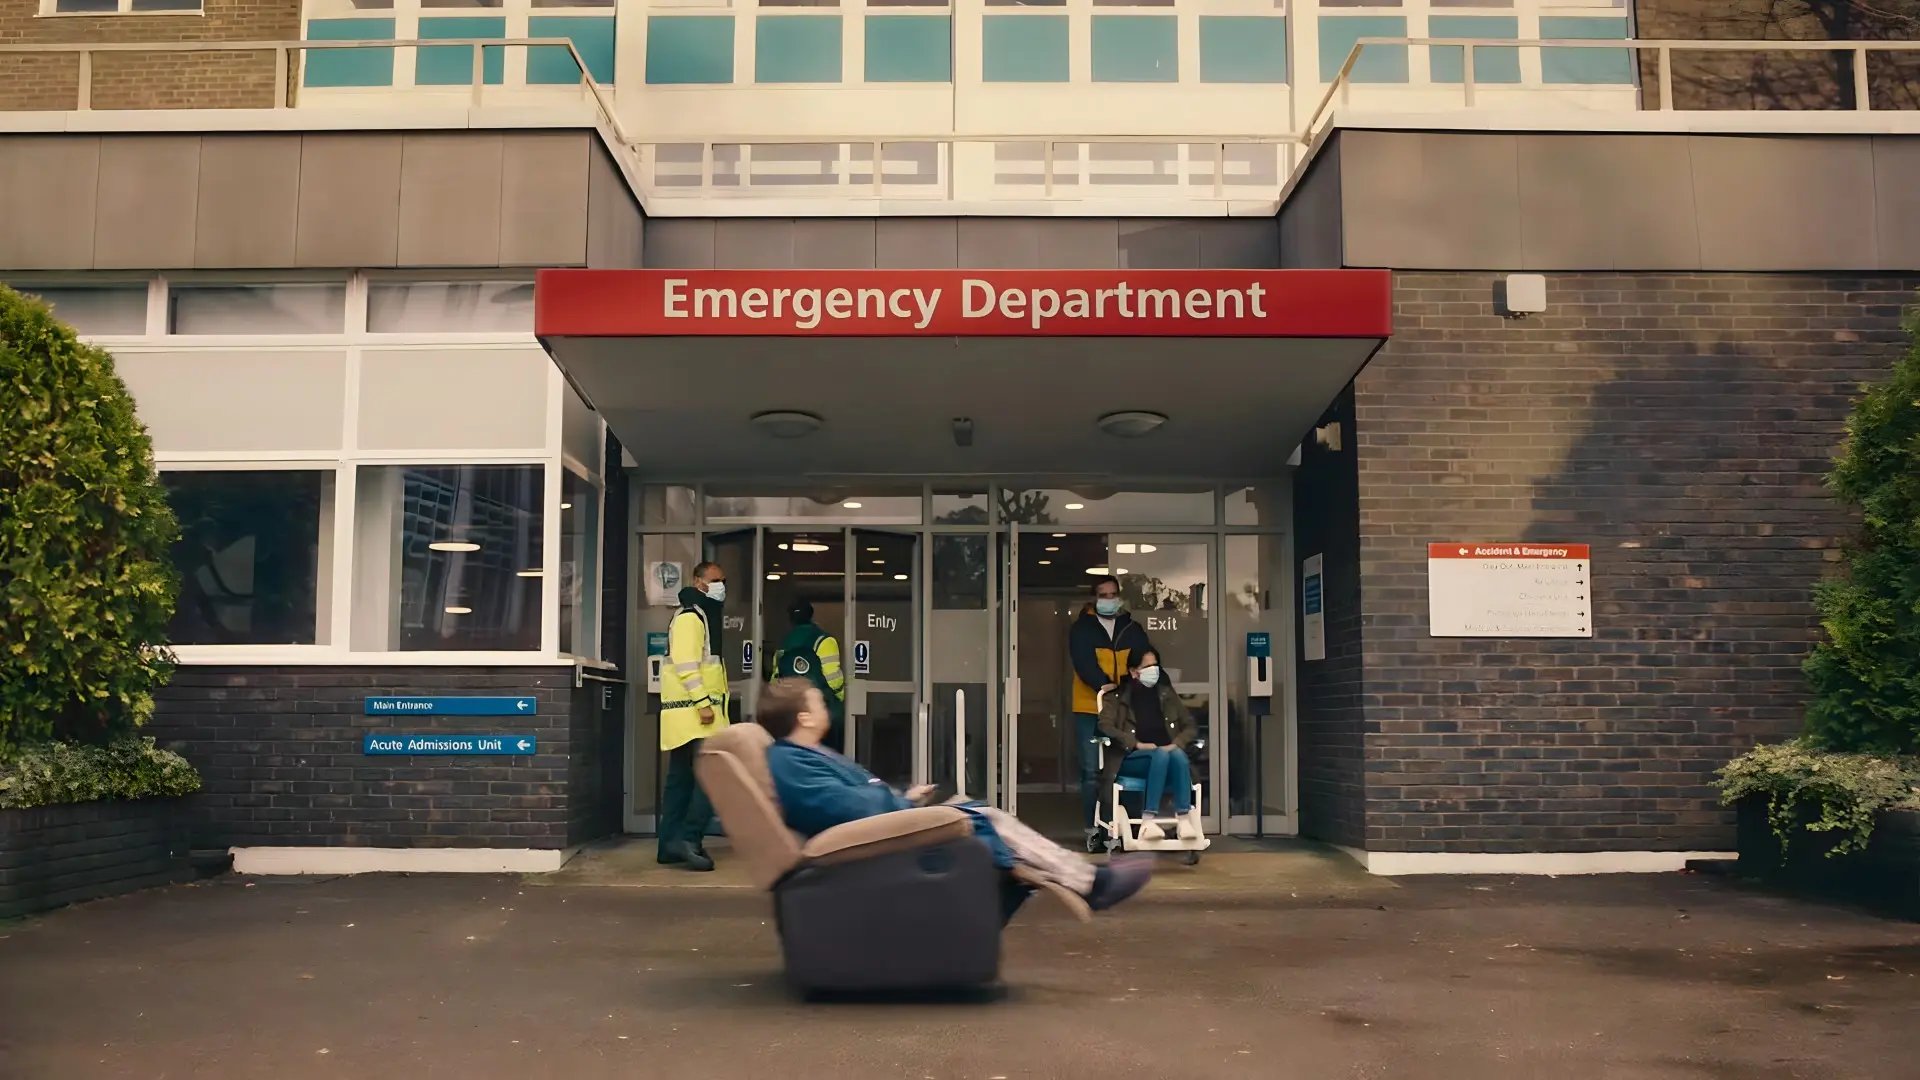 Hospital in NHS ad